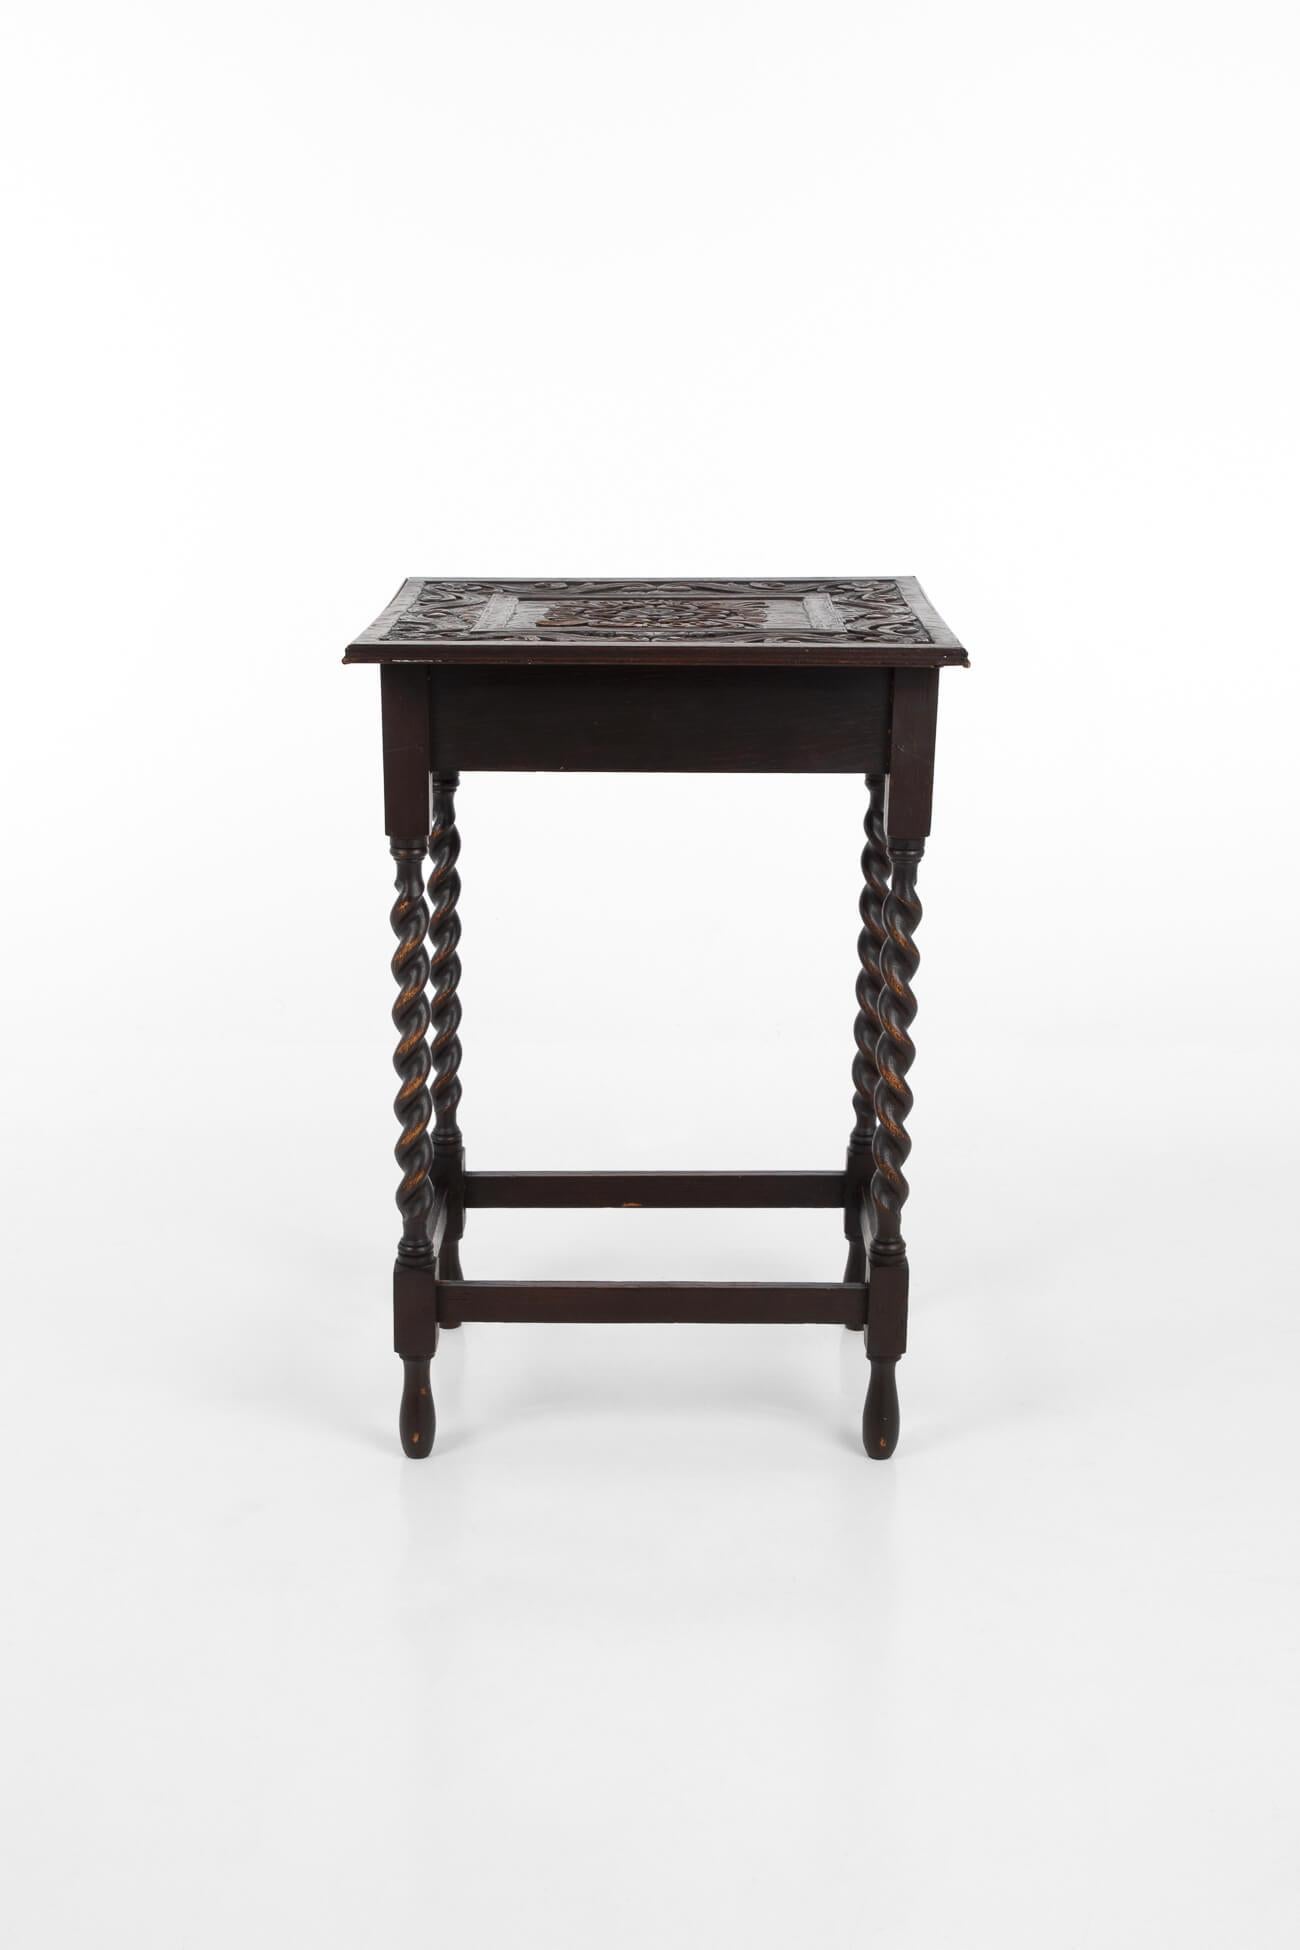 British Colonial Early 20th Century Welsh Barley Twist Occasional Table, circa 1918